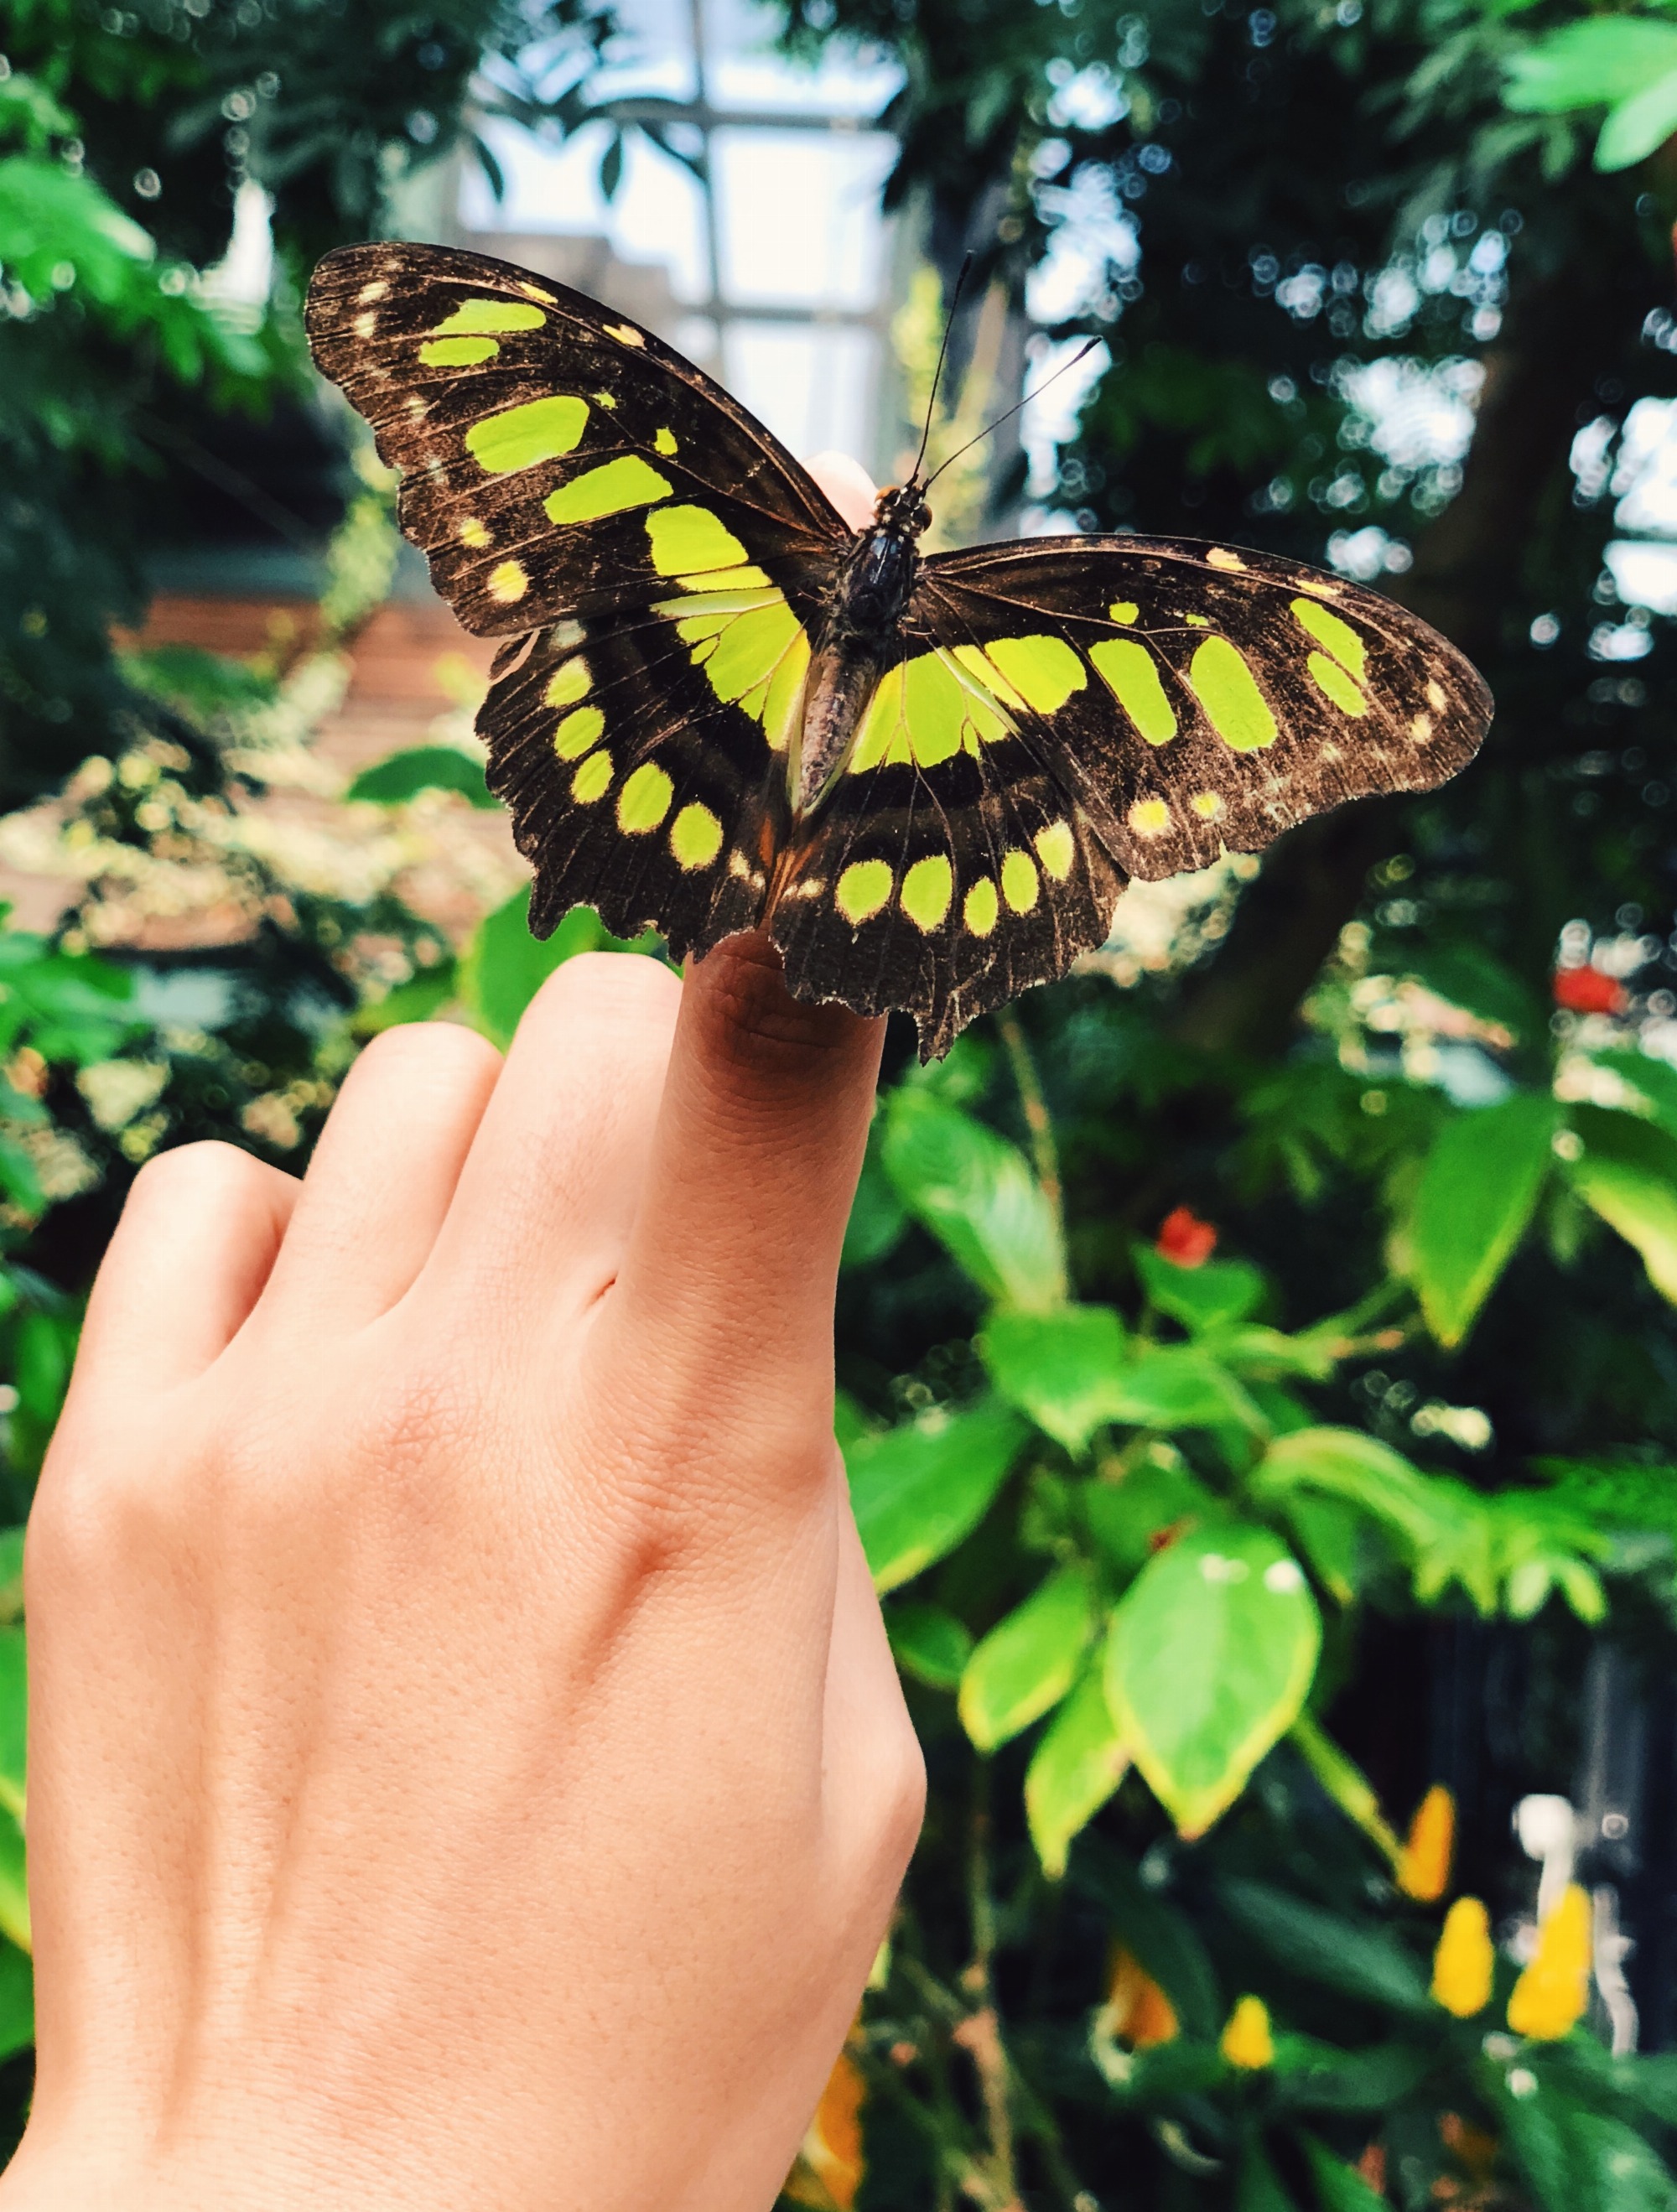 Butterfly on a hand - Butterfly greenhouse